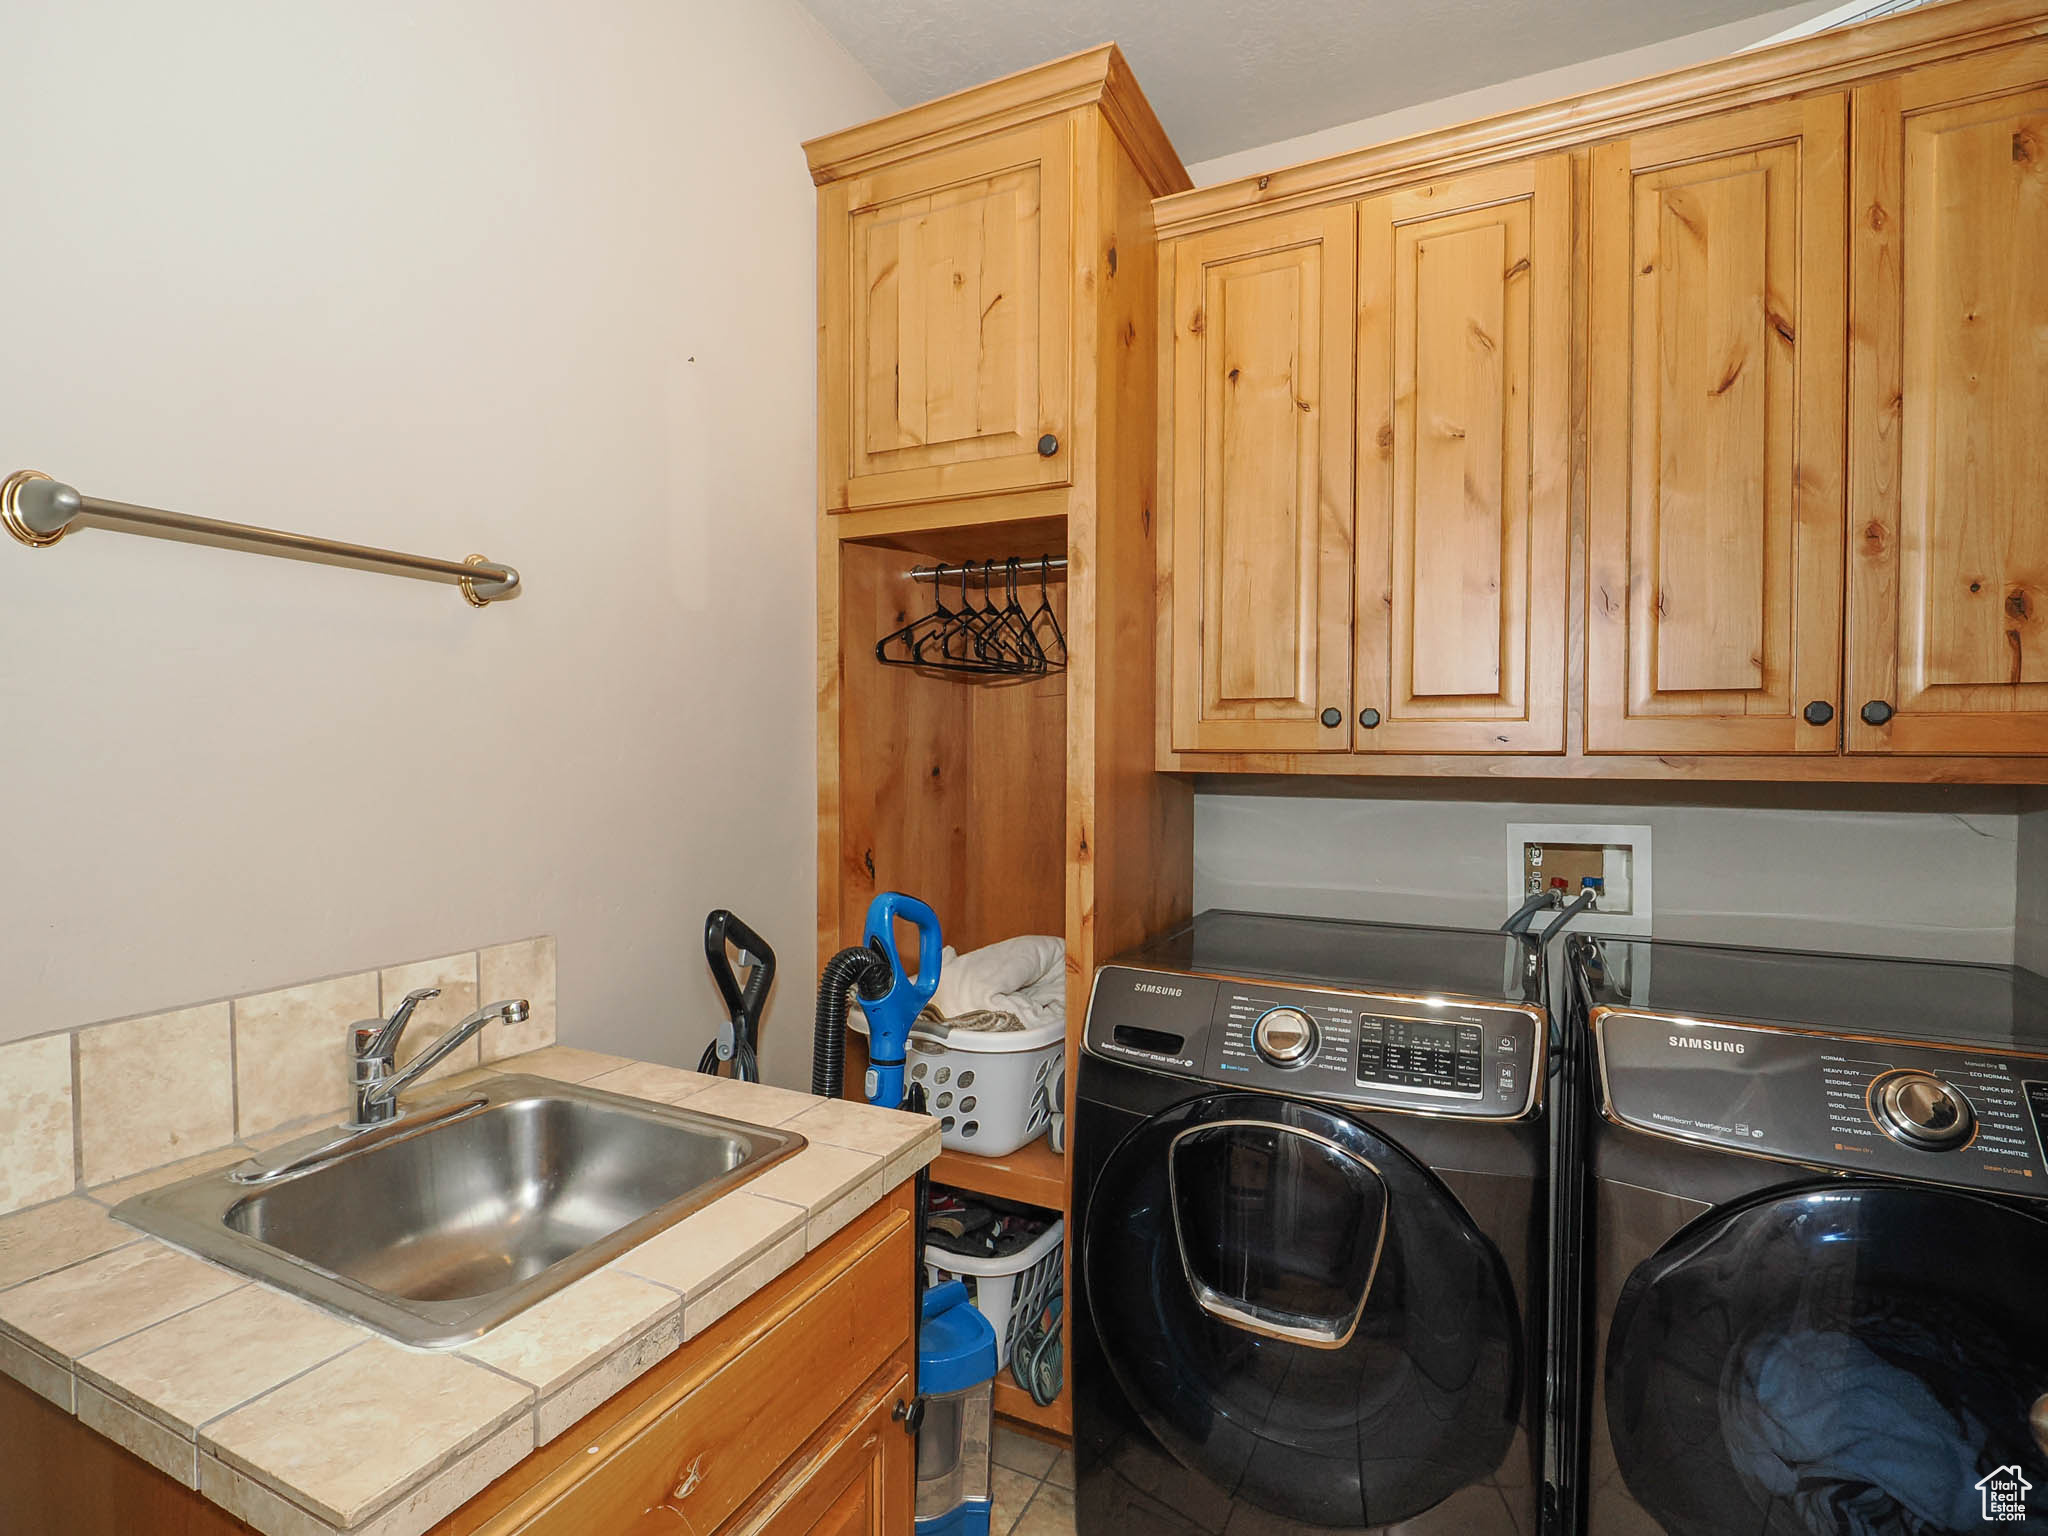 Laundry area featuring cabinets, independent washer and dryer, sink, and tile floors